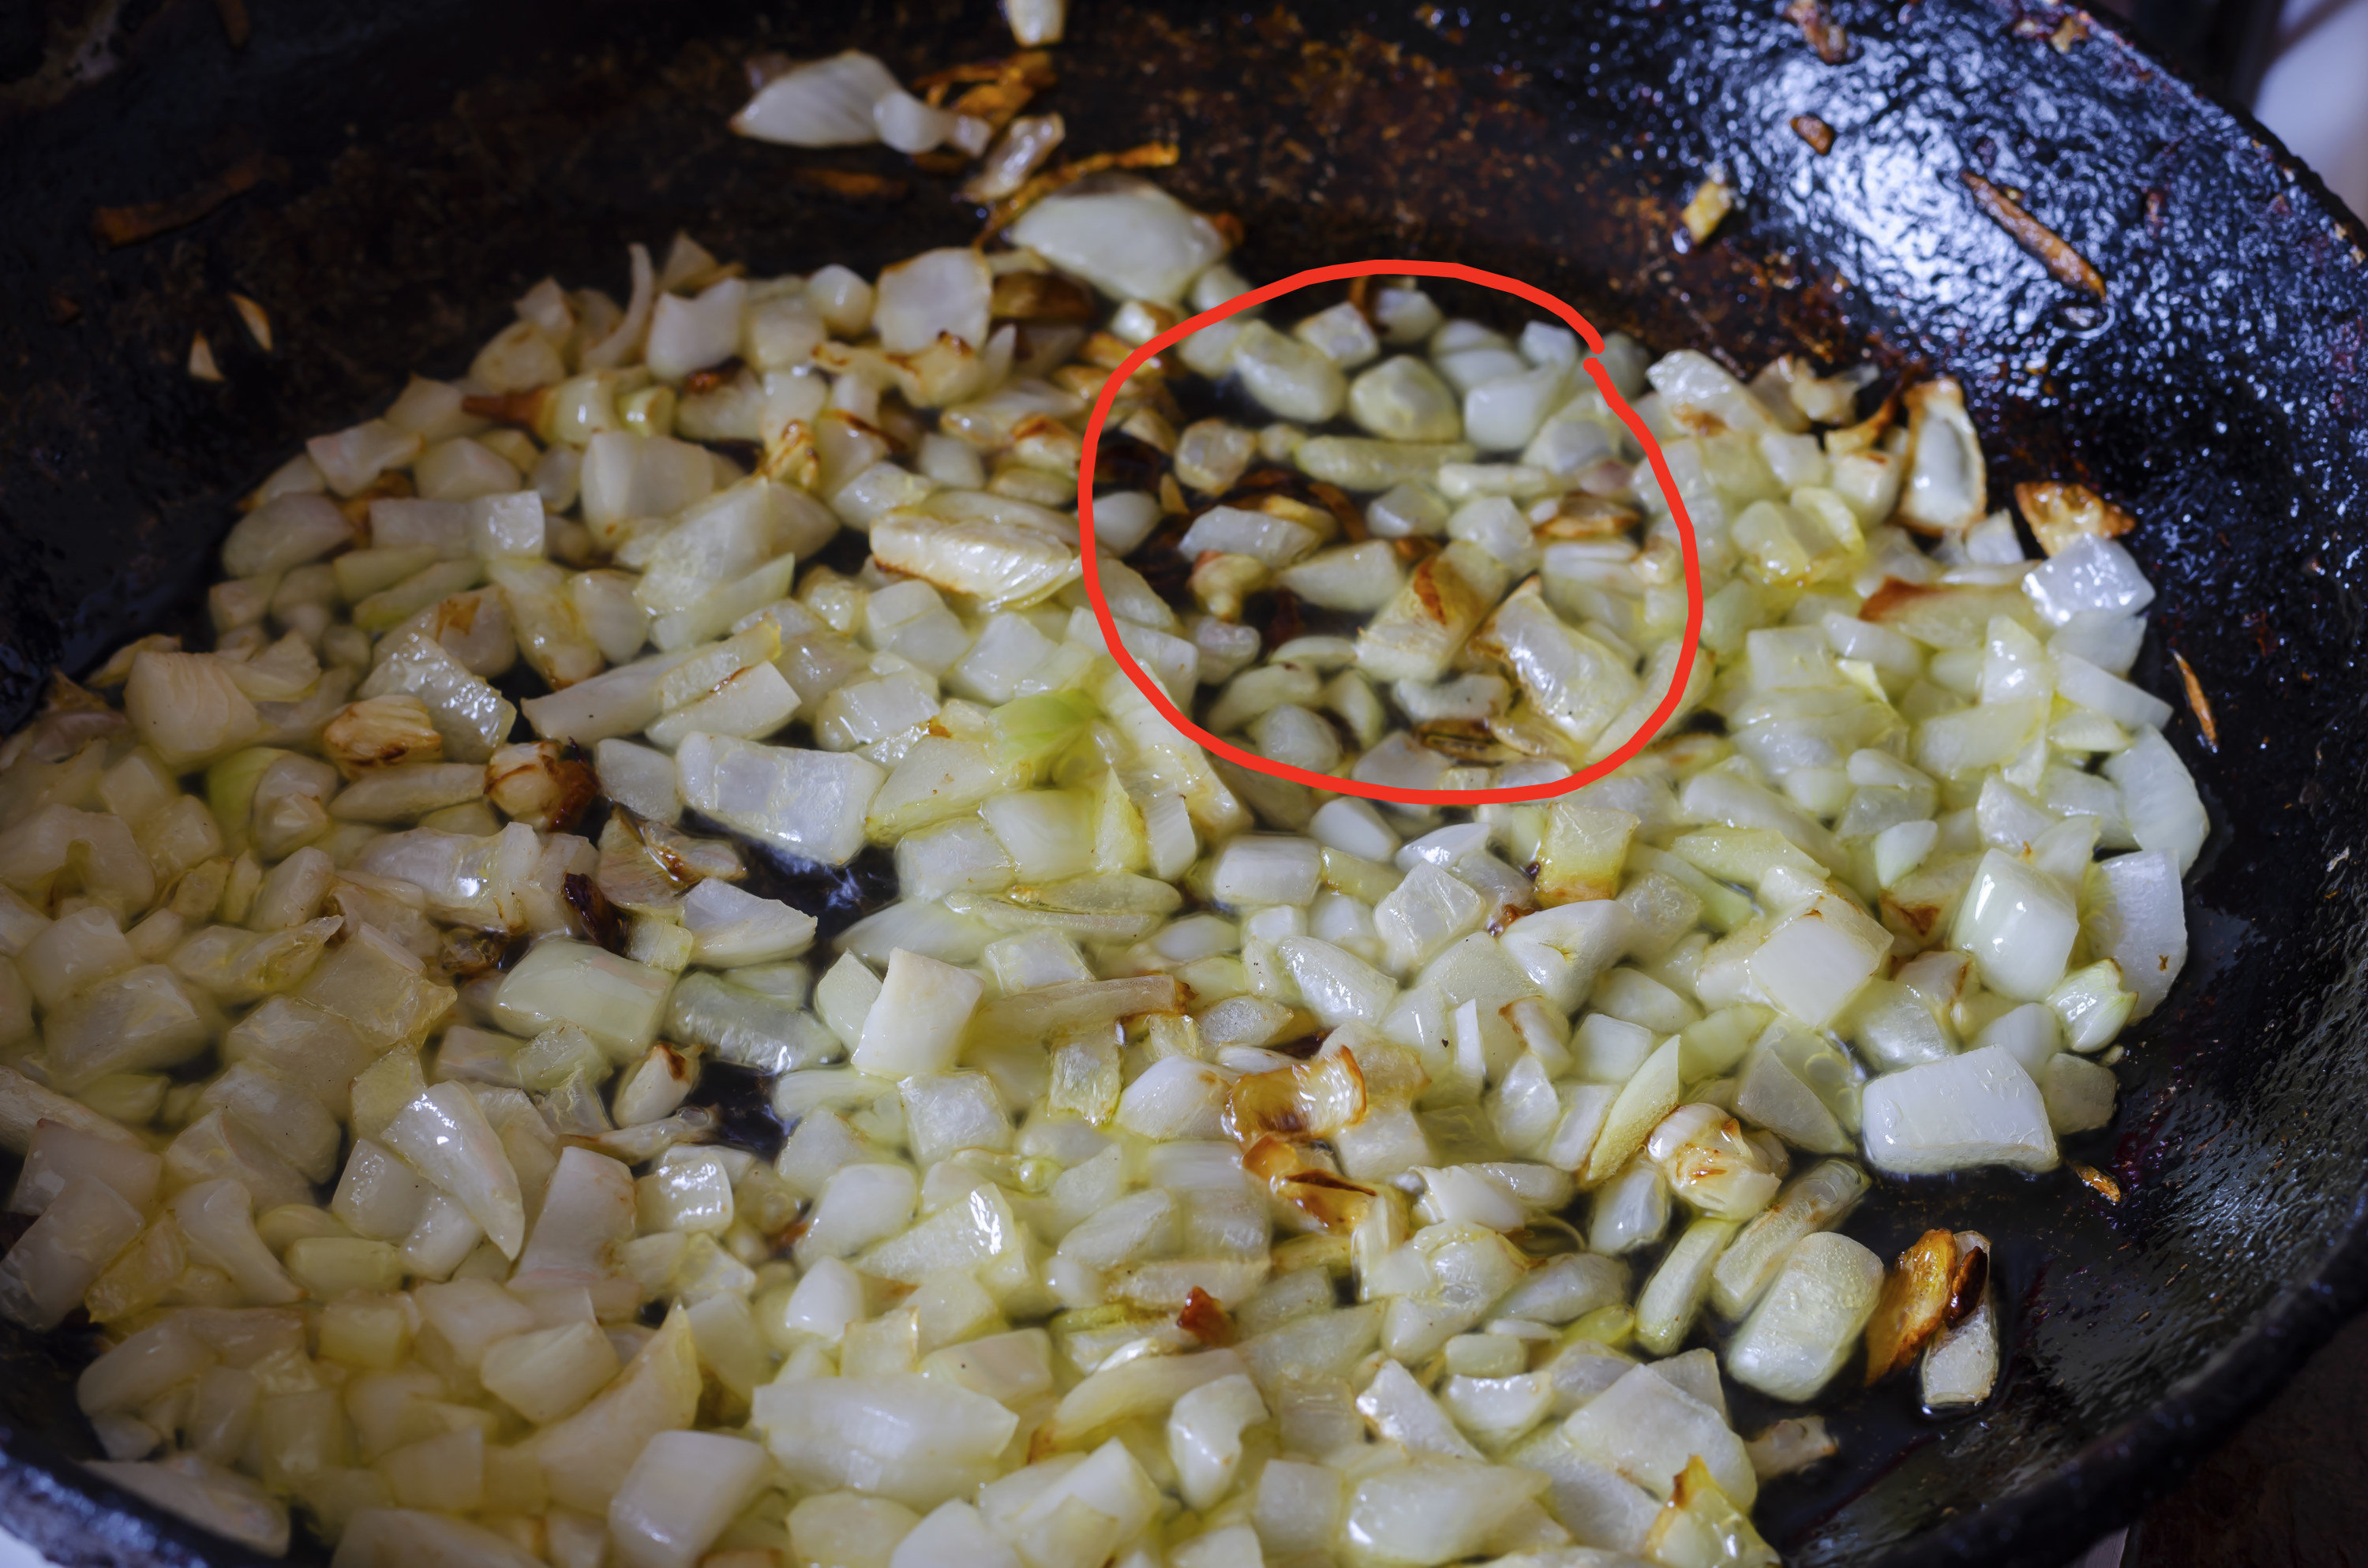 Burnt garlic sauteing with onions and circled